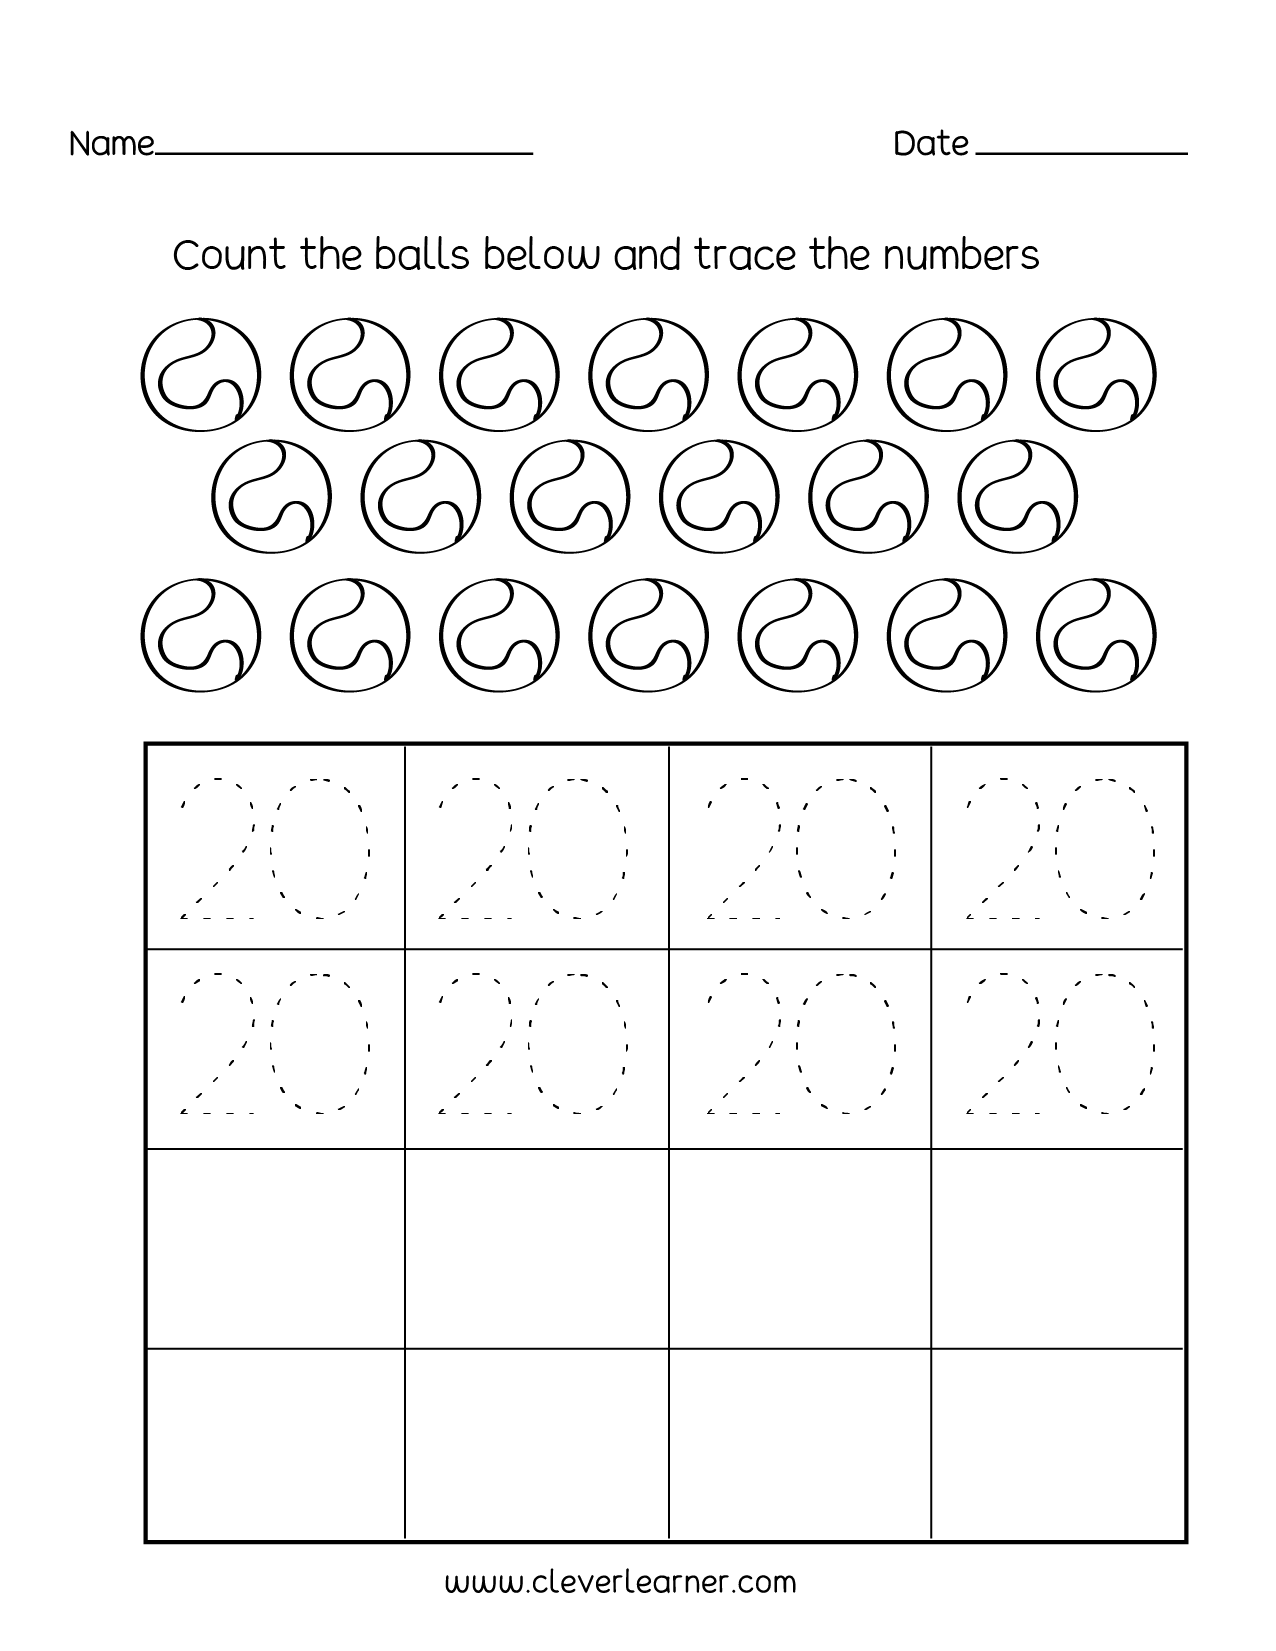 numbers-to-20-worksheet-escolagersonalvesgui